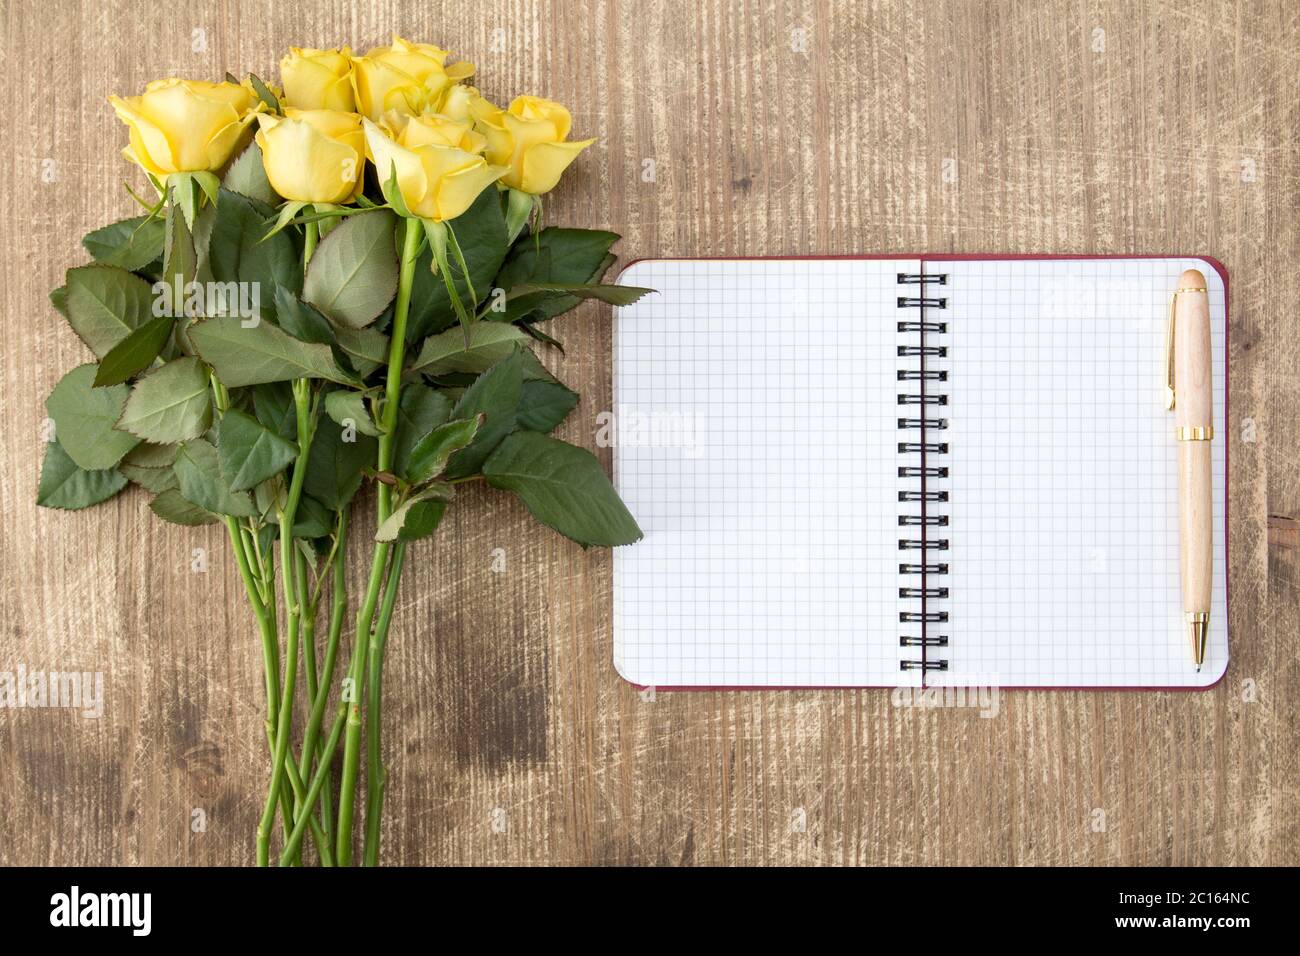 Blank notebook and bunch of yellow roses Stock Photo